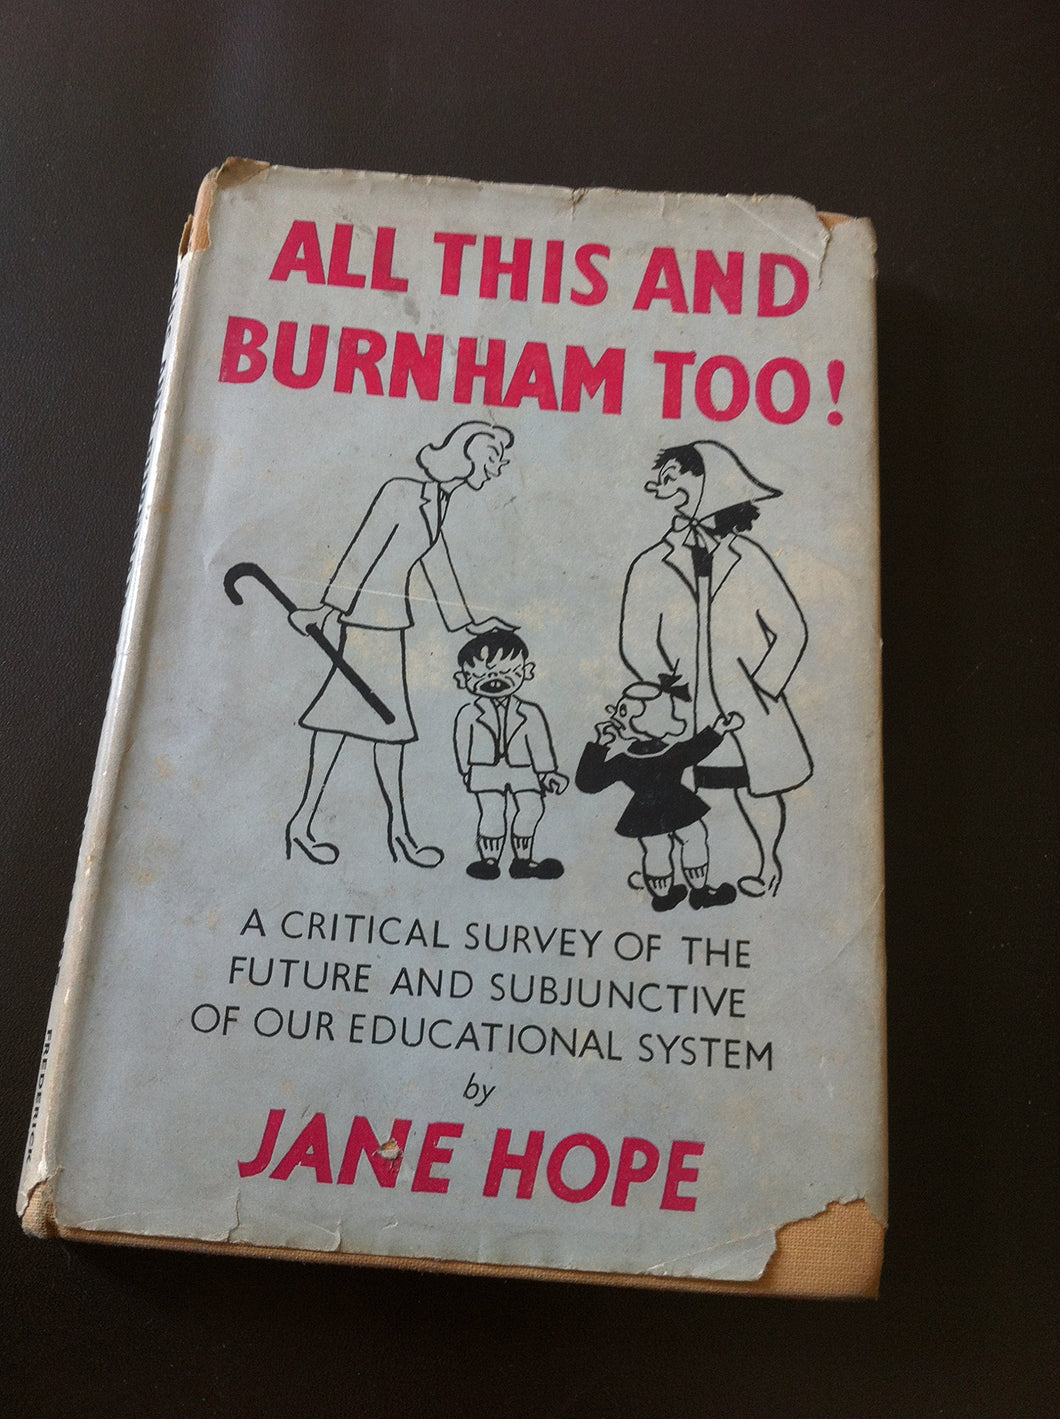 ALL THIS AND BURNHAM TOO! A CRITICAL SURVEY OF THE FUTURE AND SUBJUNCTIVE OF OUR EDUCATIONAL SYSTEM [Hardcover] Hope, Jane